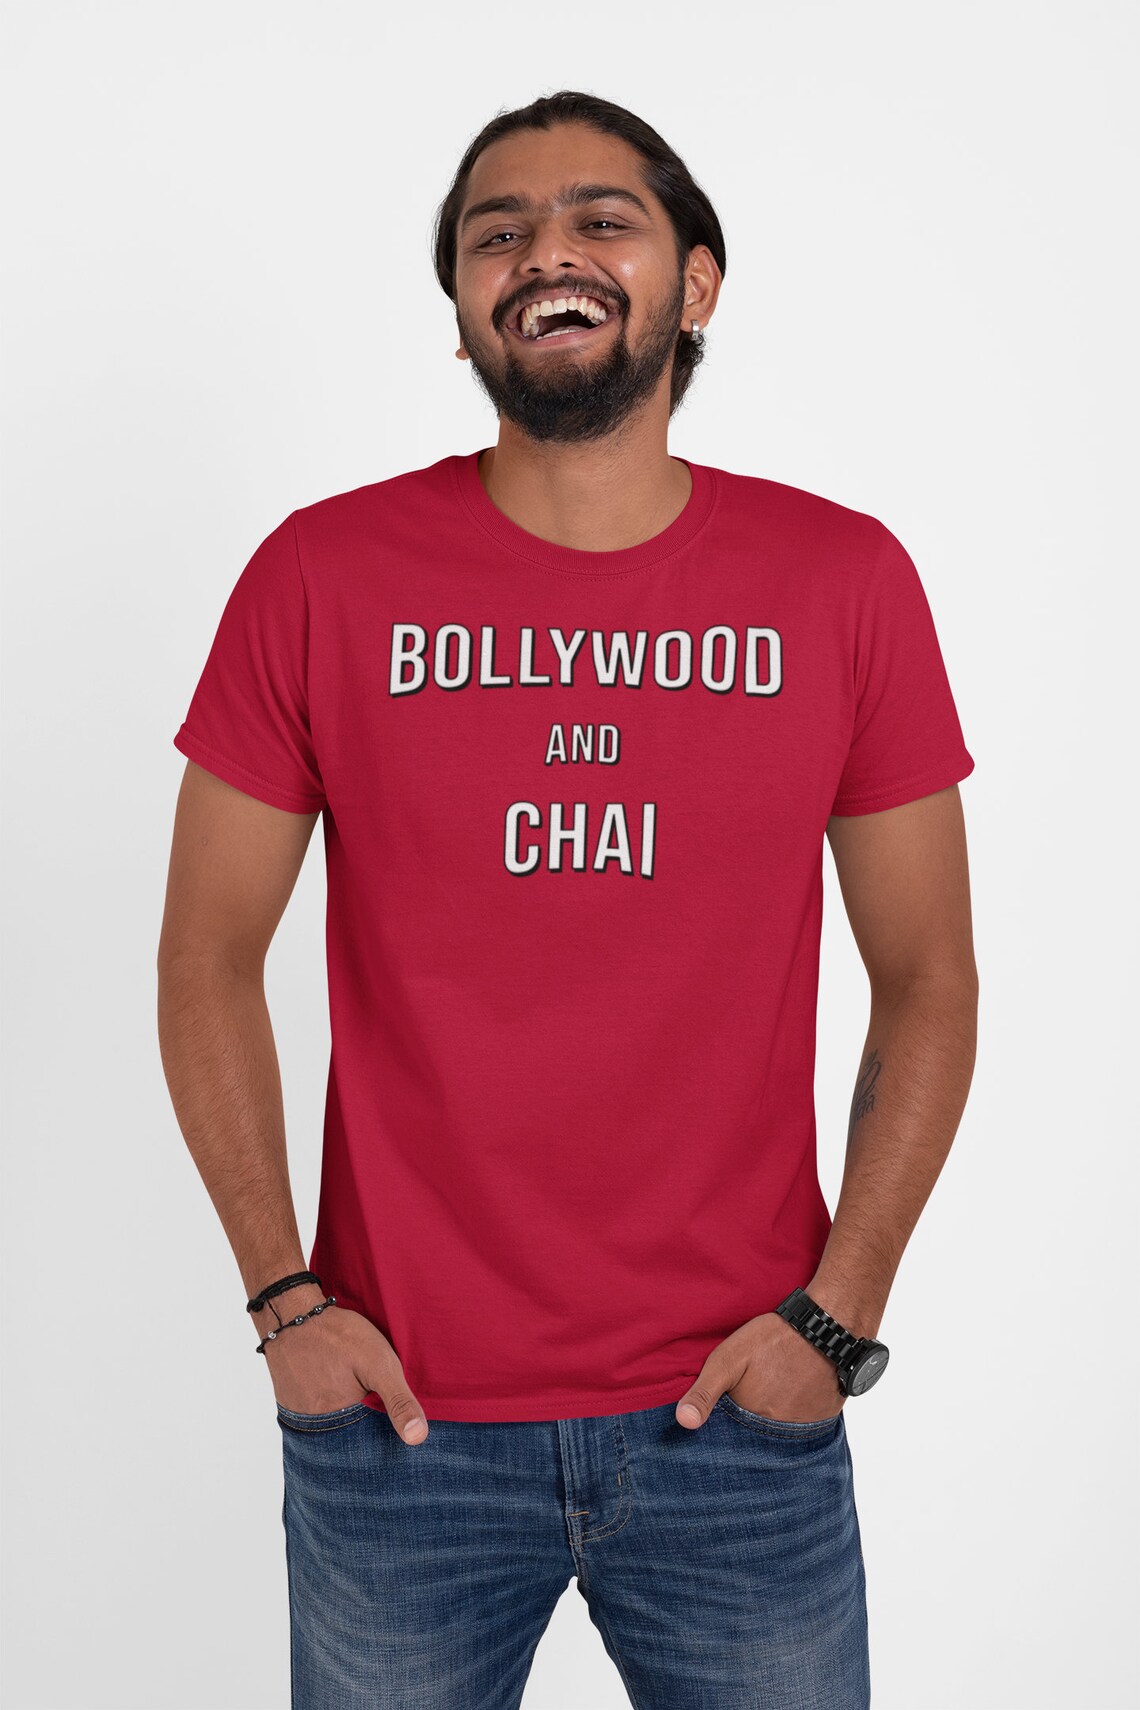 Funny Bollywood and Chai Shirt Unisex Tee Indian Desi Shirt - Etsy